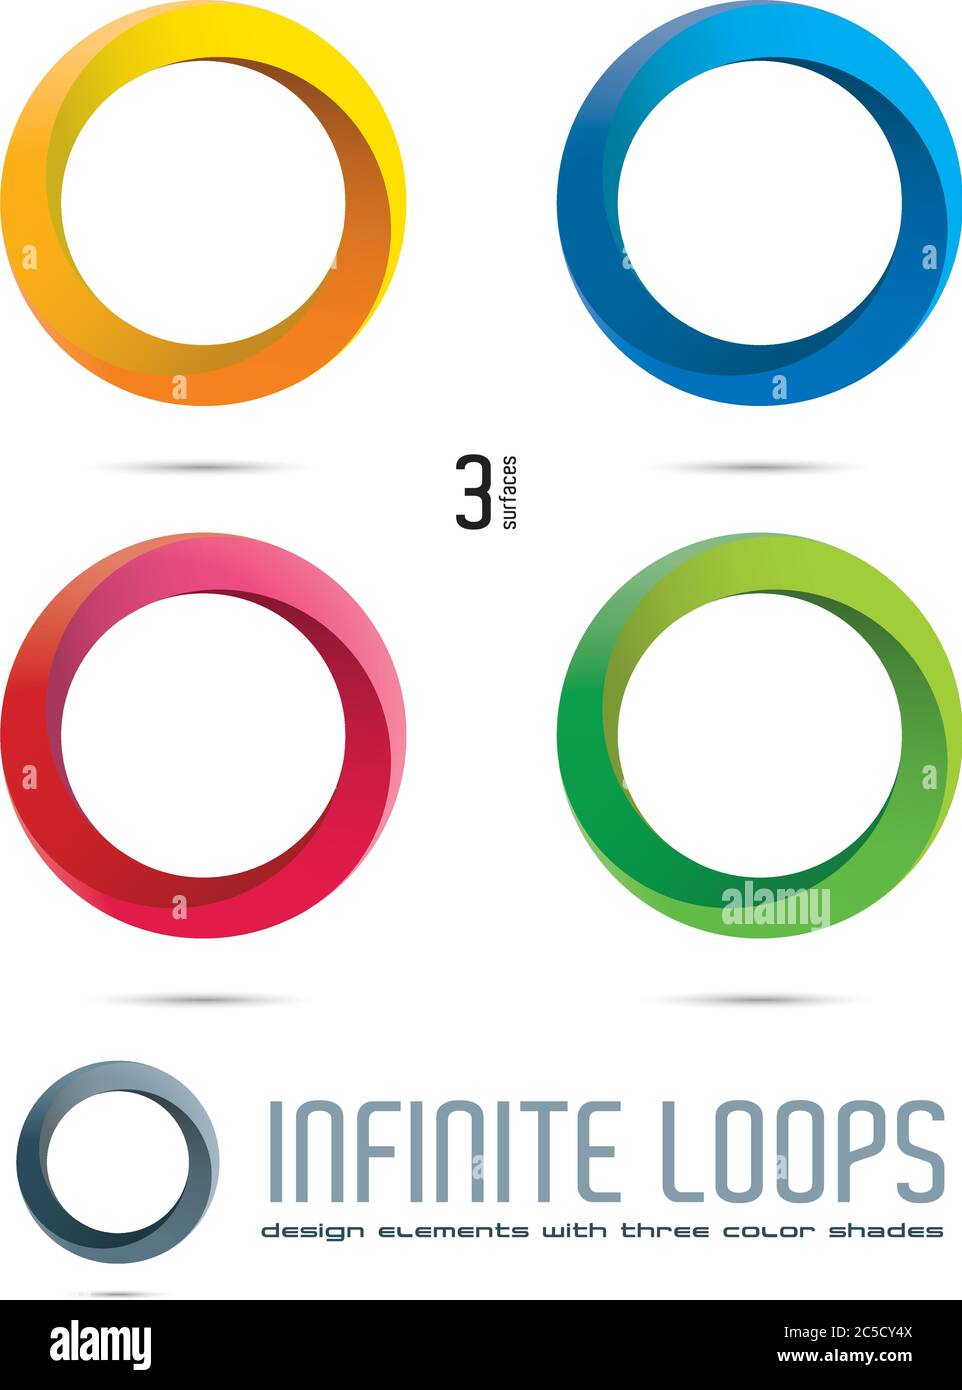 Impossible Infinite Loop Vector Design Elements with three surfaces and color shades. Easily editable with global color swatches. Stock Vector